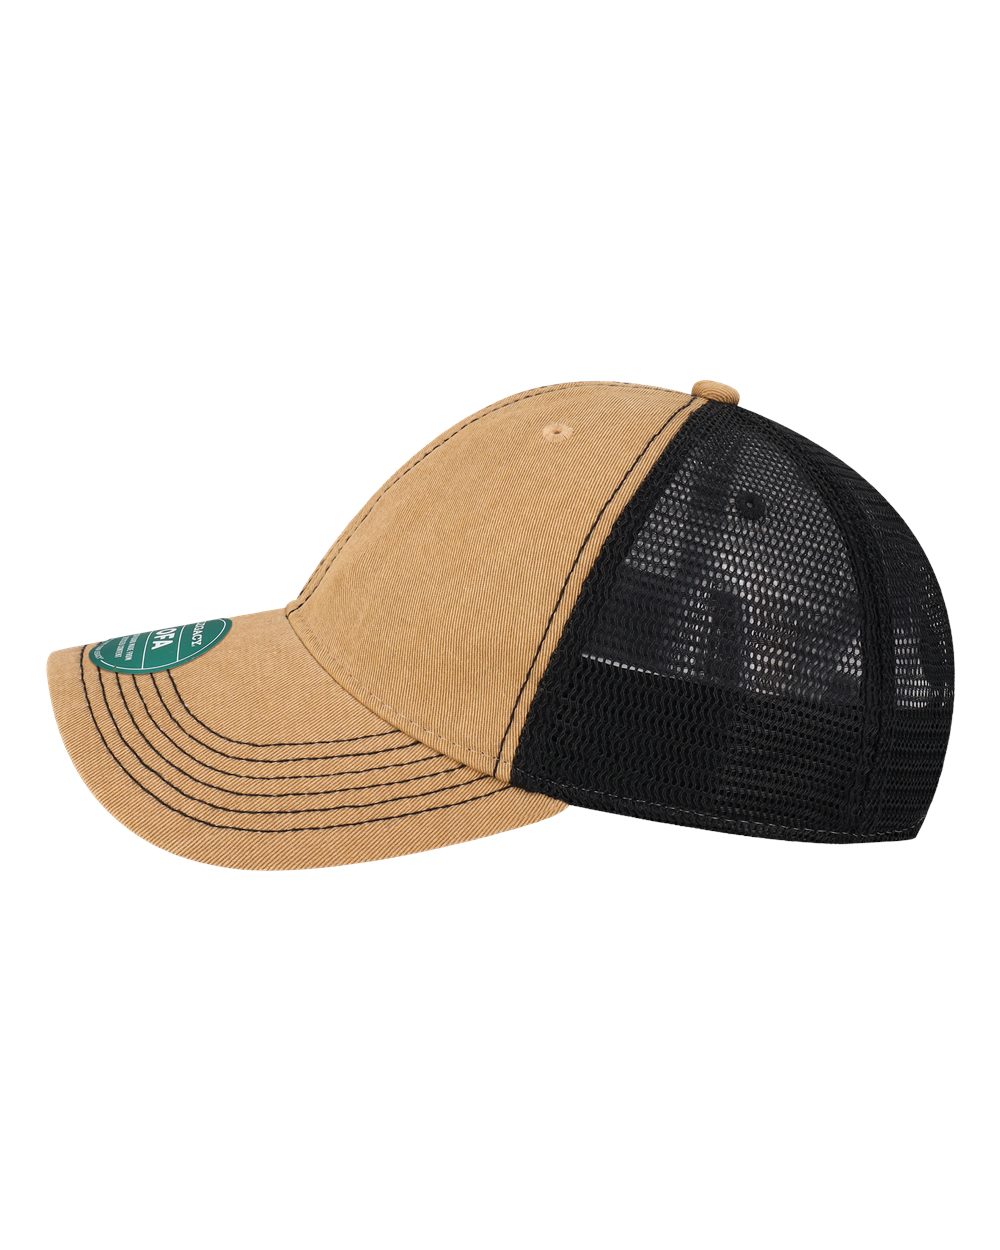 Unstructured Low Profile Old Favorite Trucker Caps for Men and